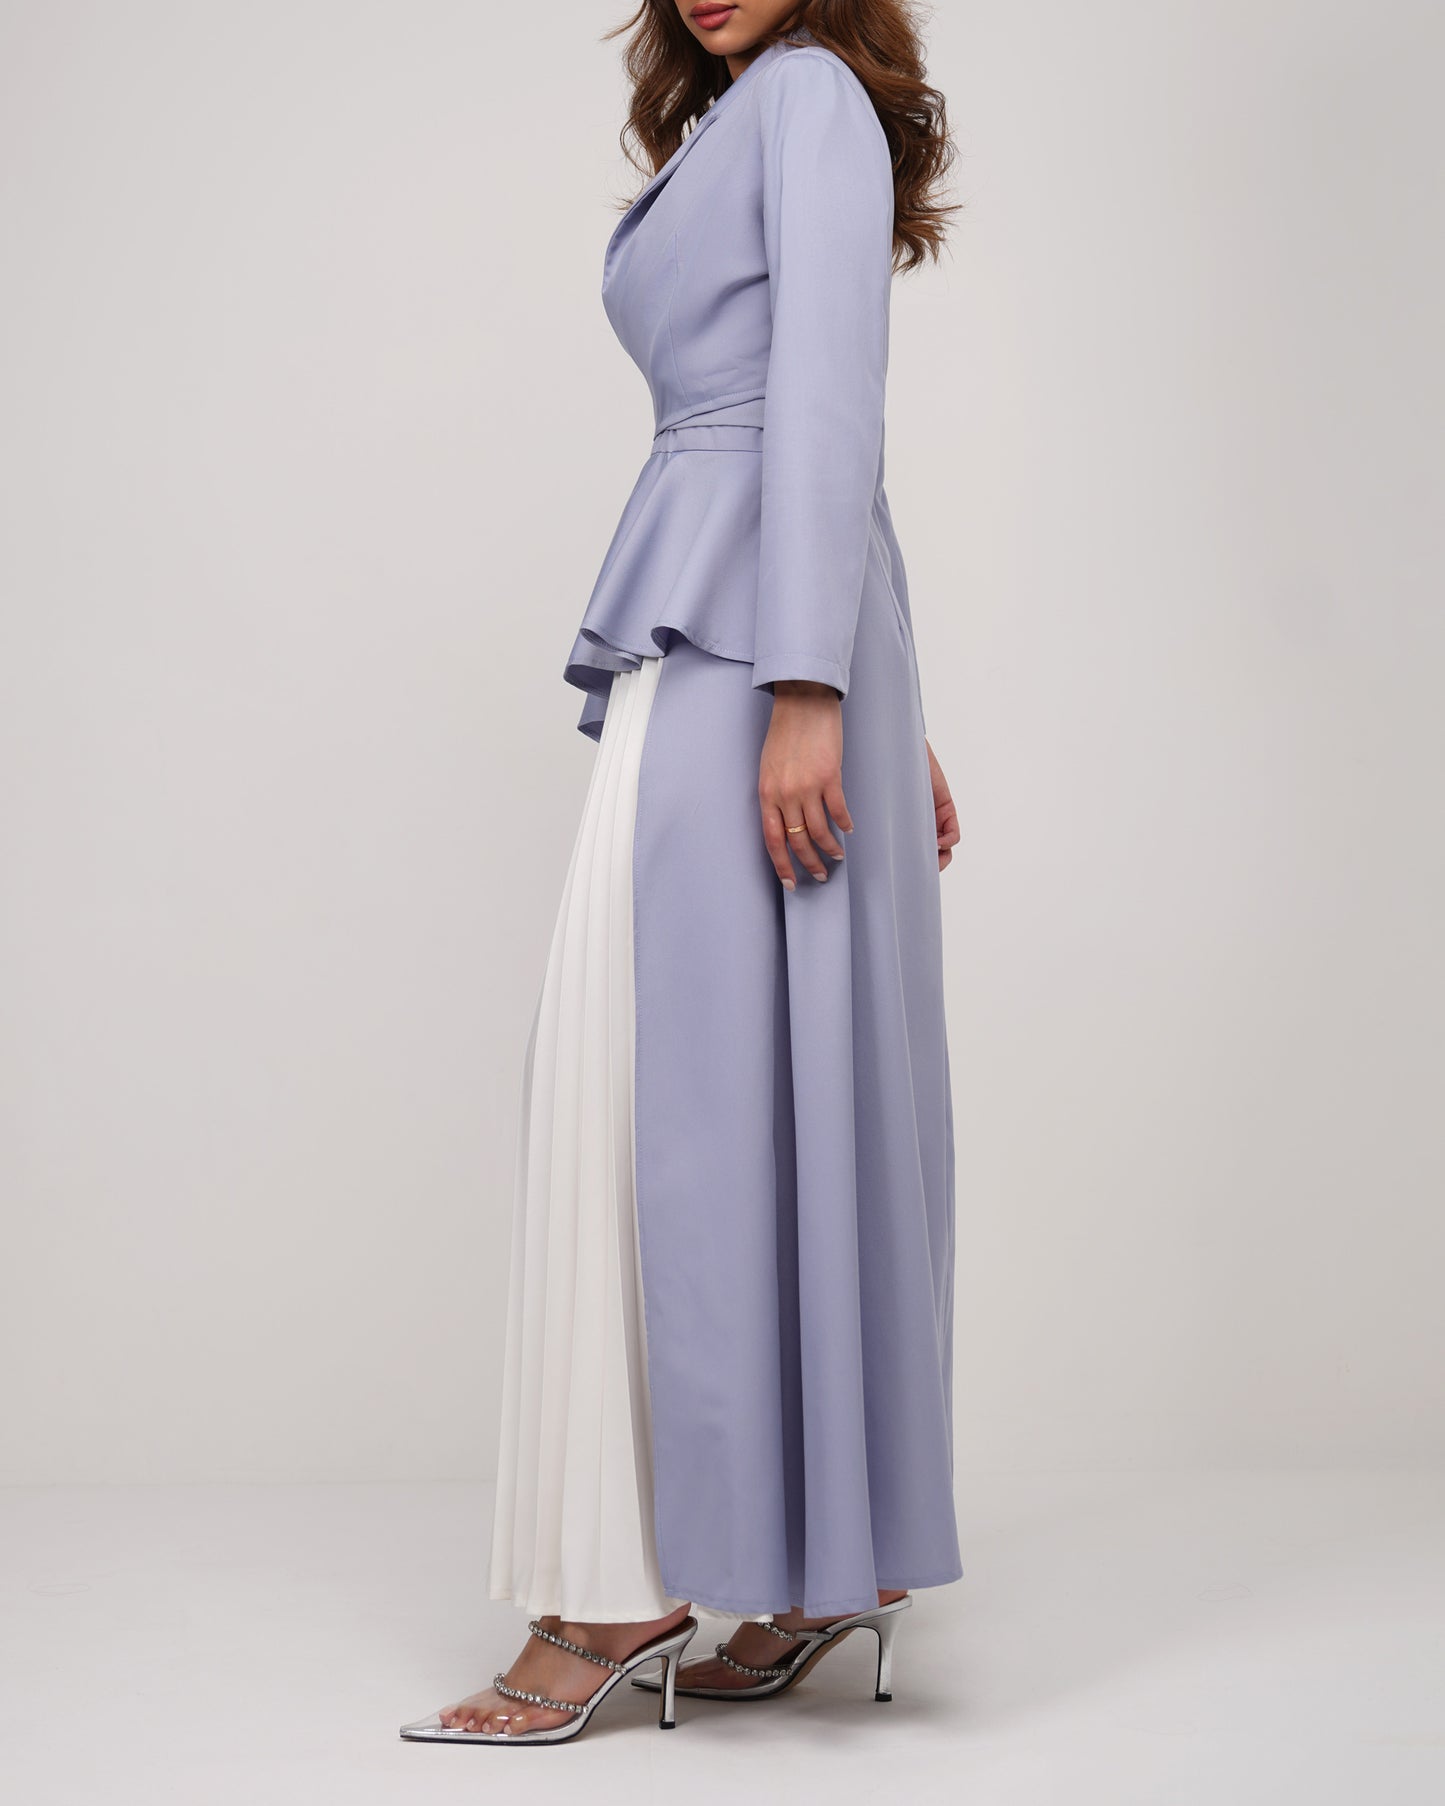 Blue violet pleated detail dress and cropped tie blazer set